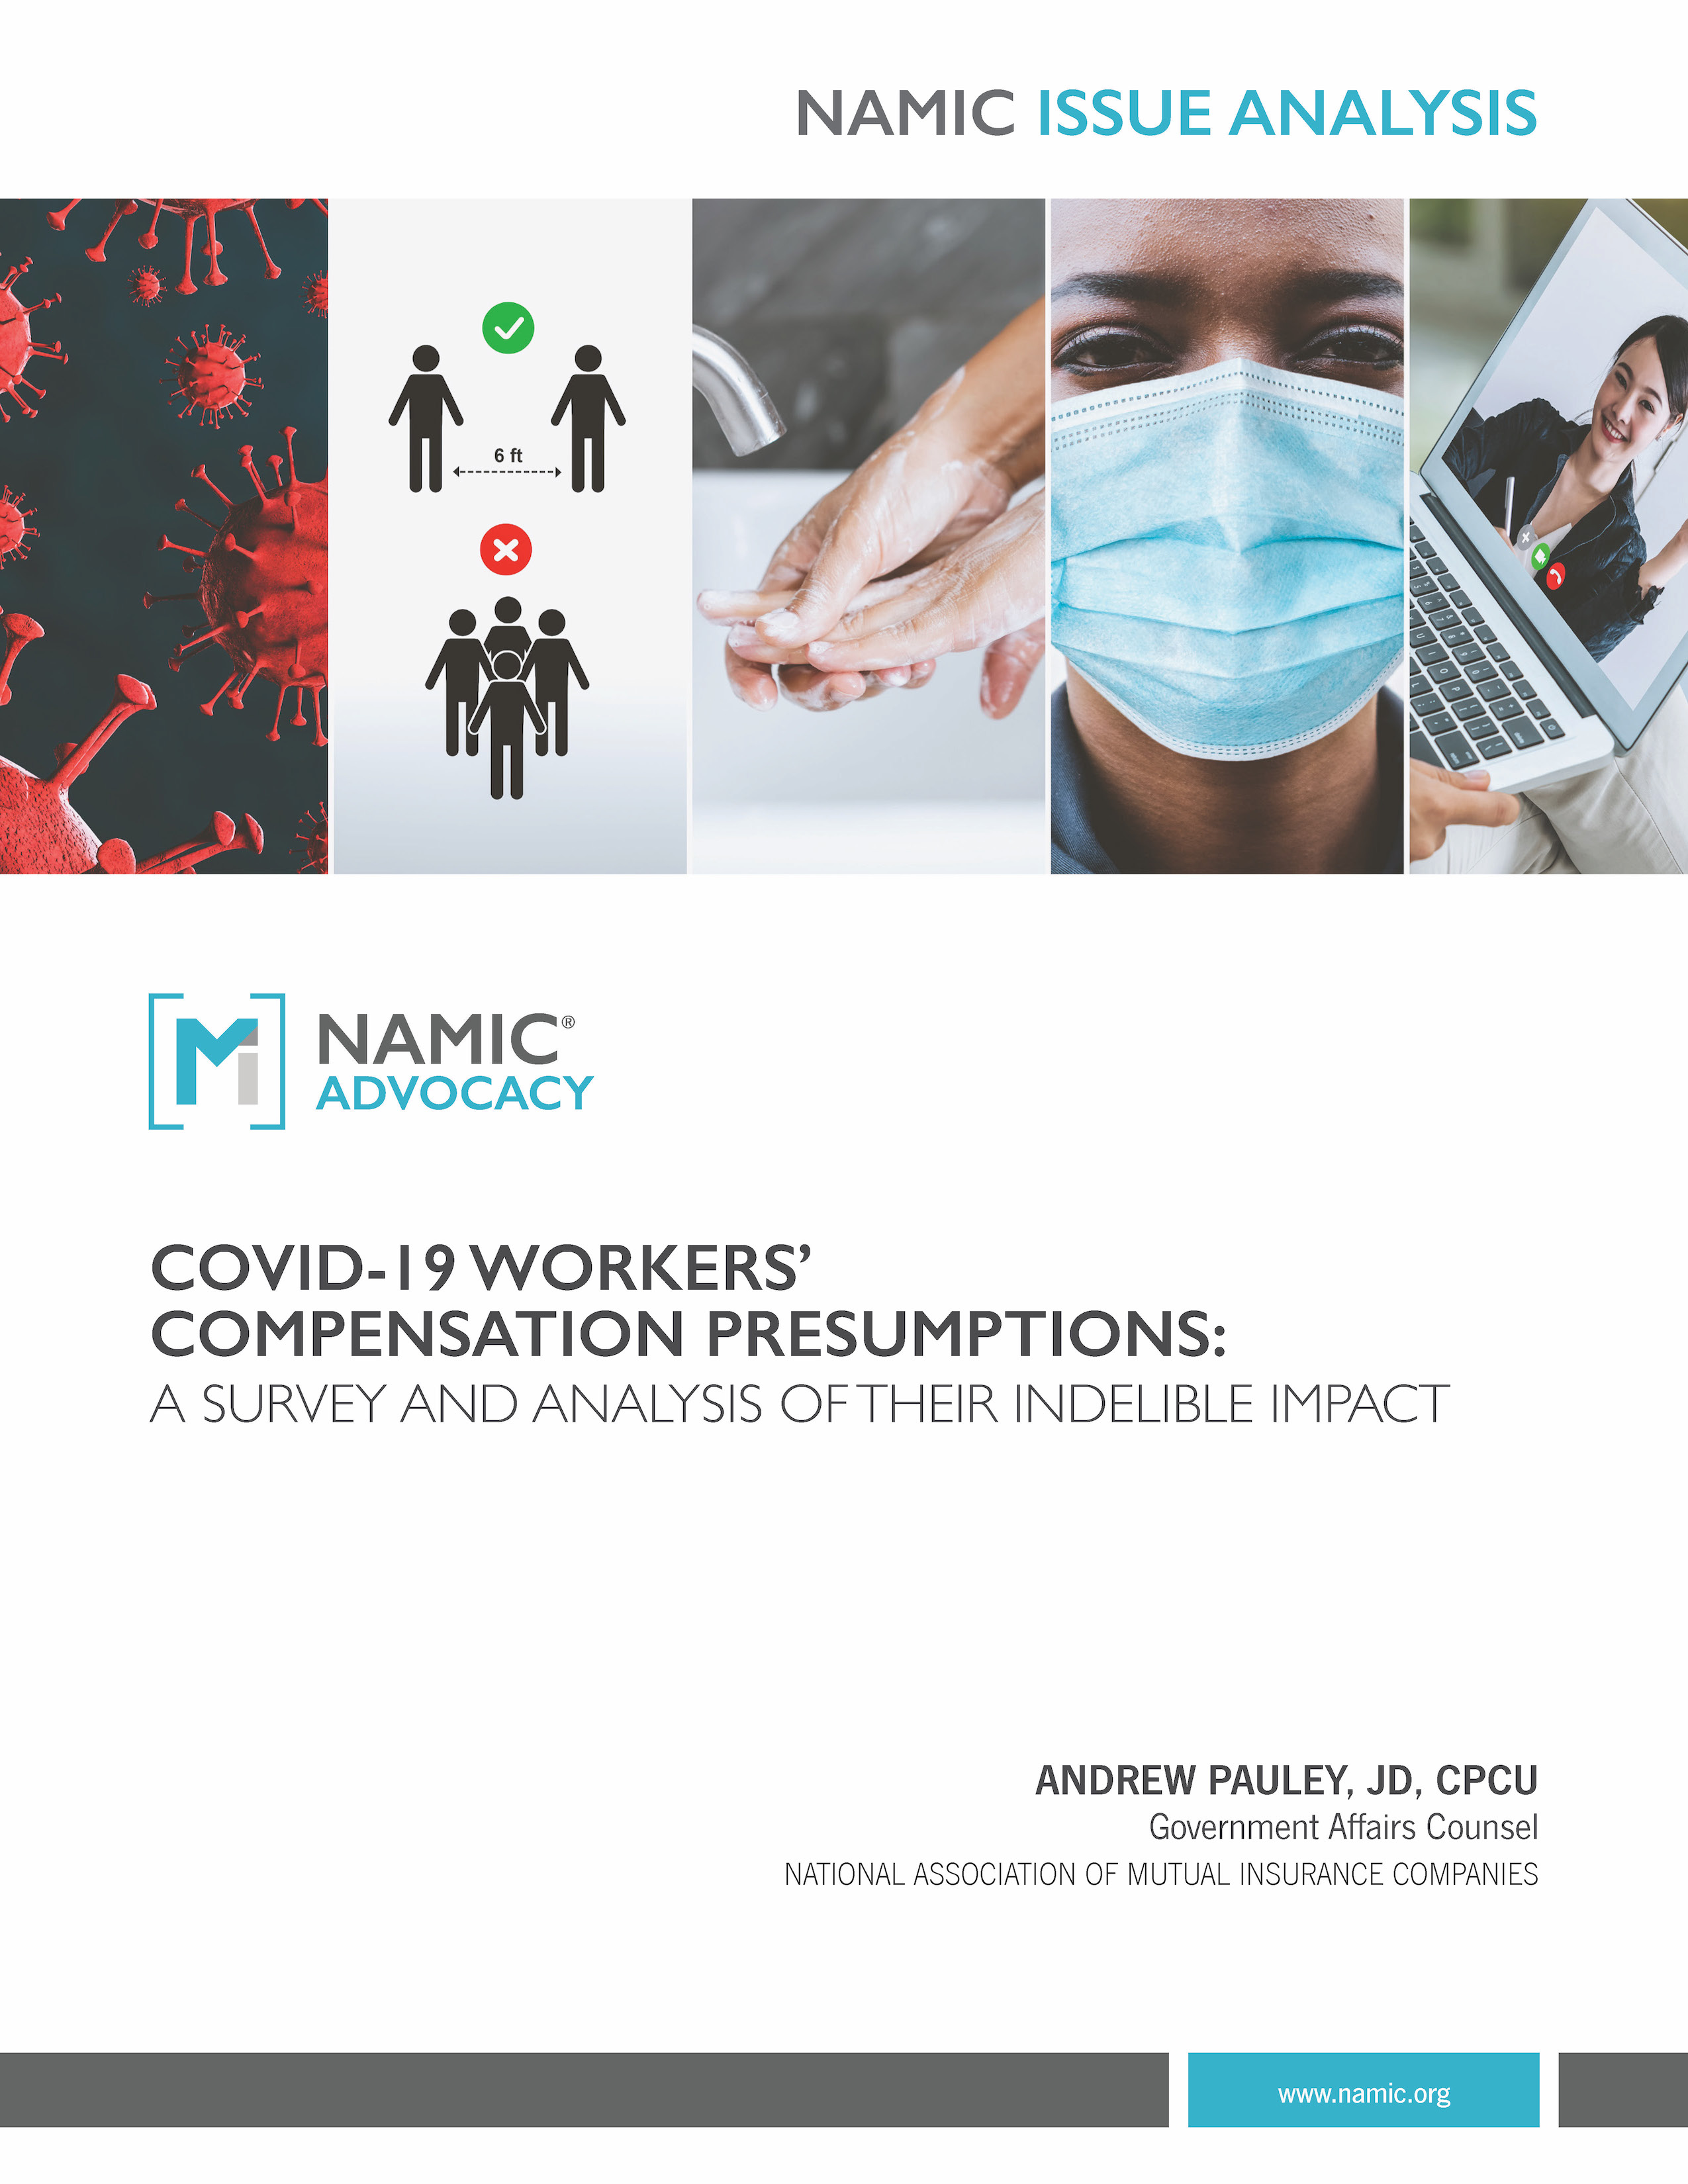 COVID-19 Workers’ Compensation Presumptions: A Survey and Analysis of Their Indelible Impact PDF